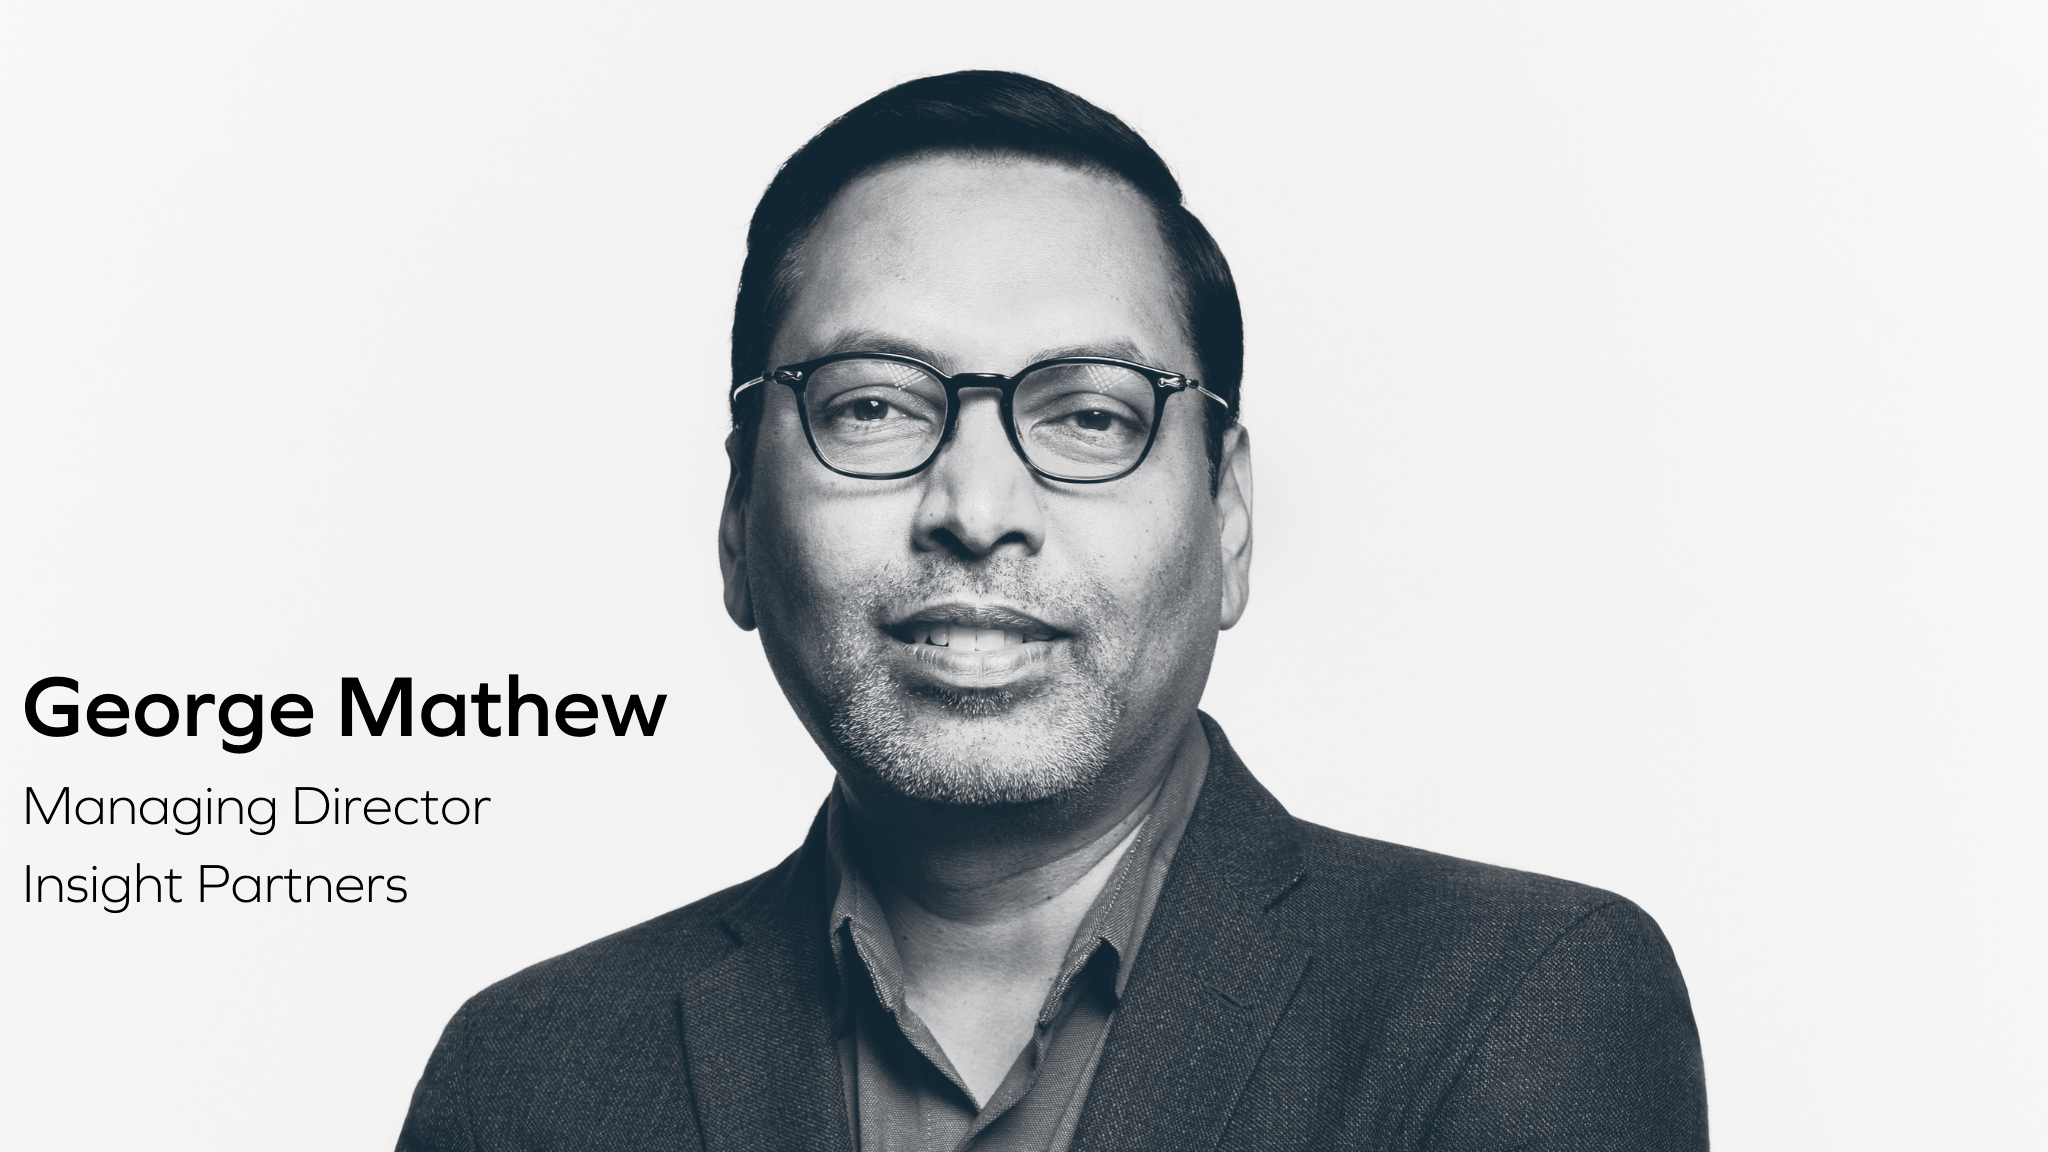 George Mathew, Investor and Managing Director at Insight Partners